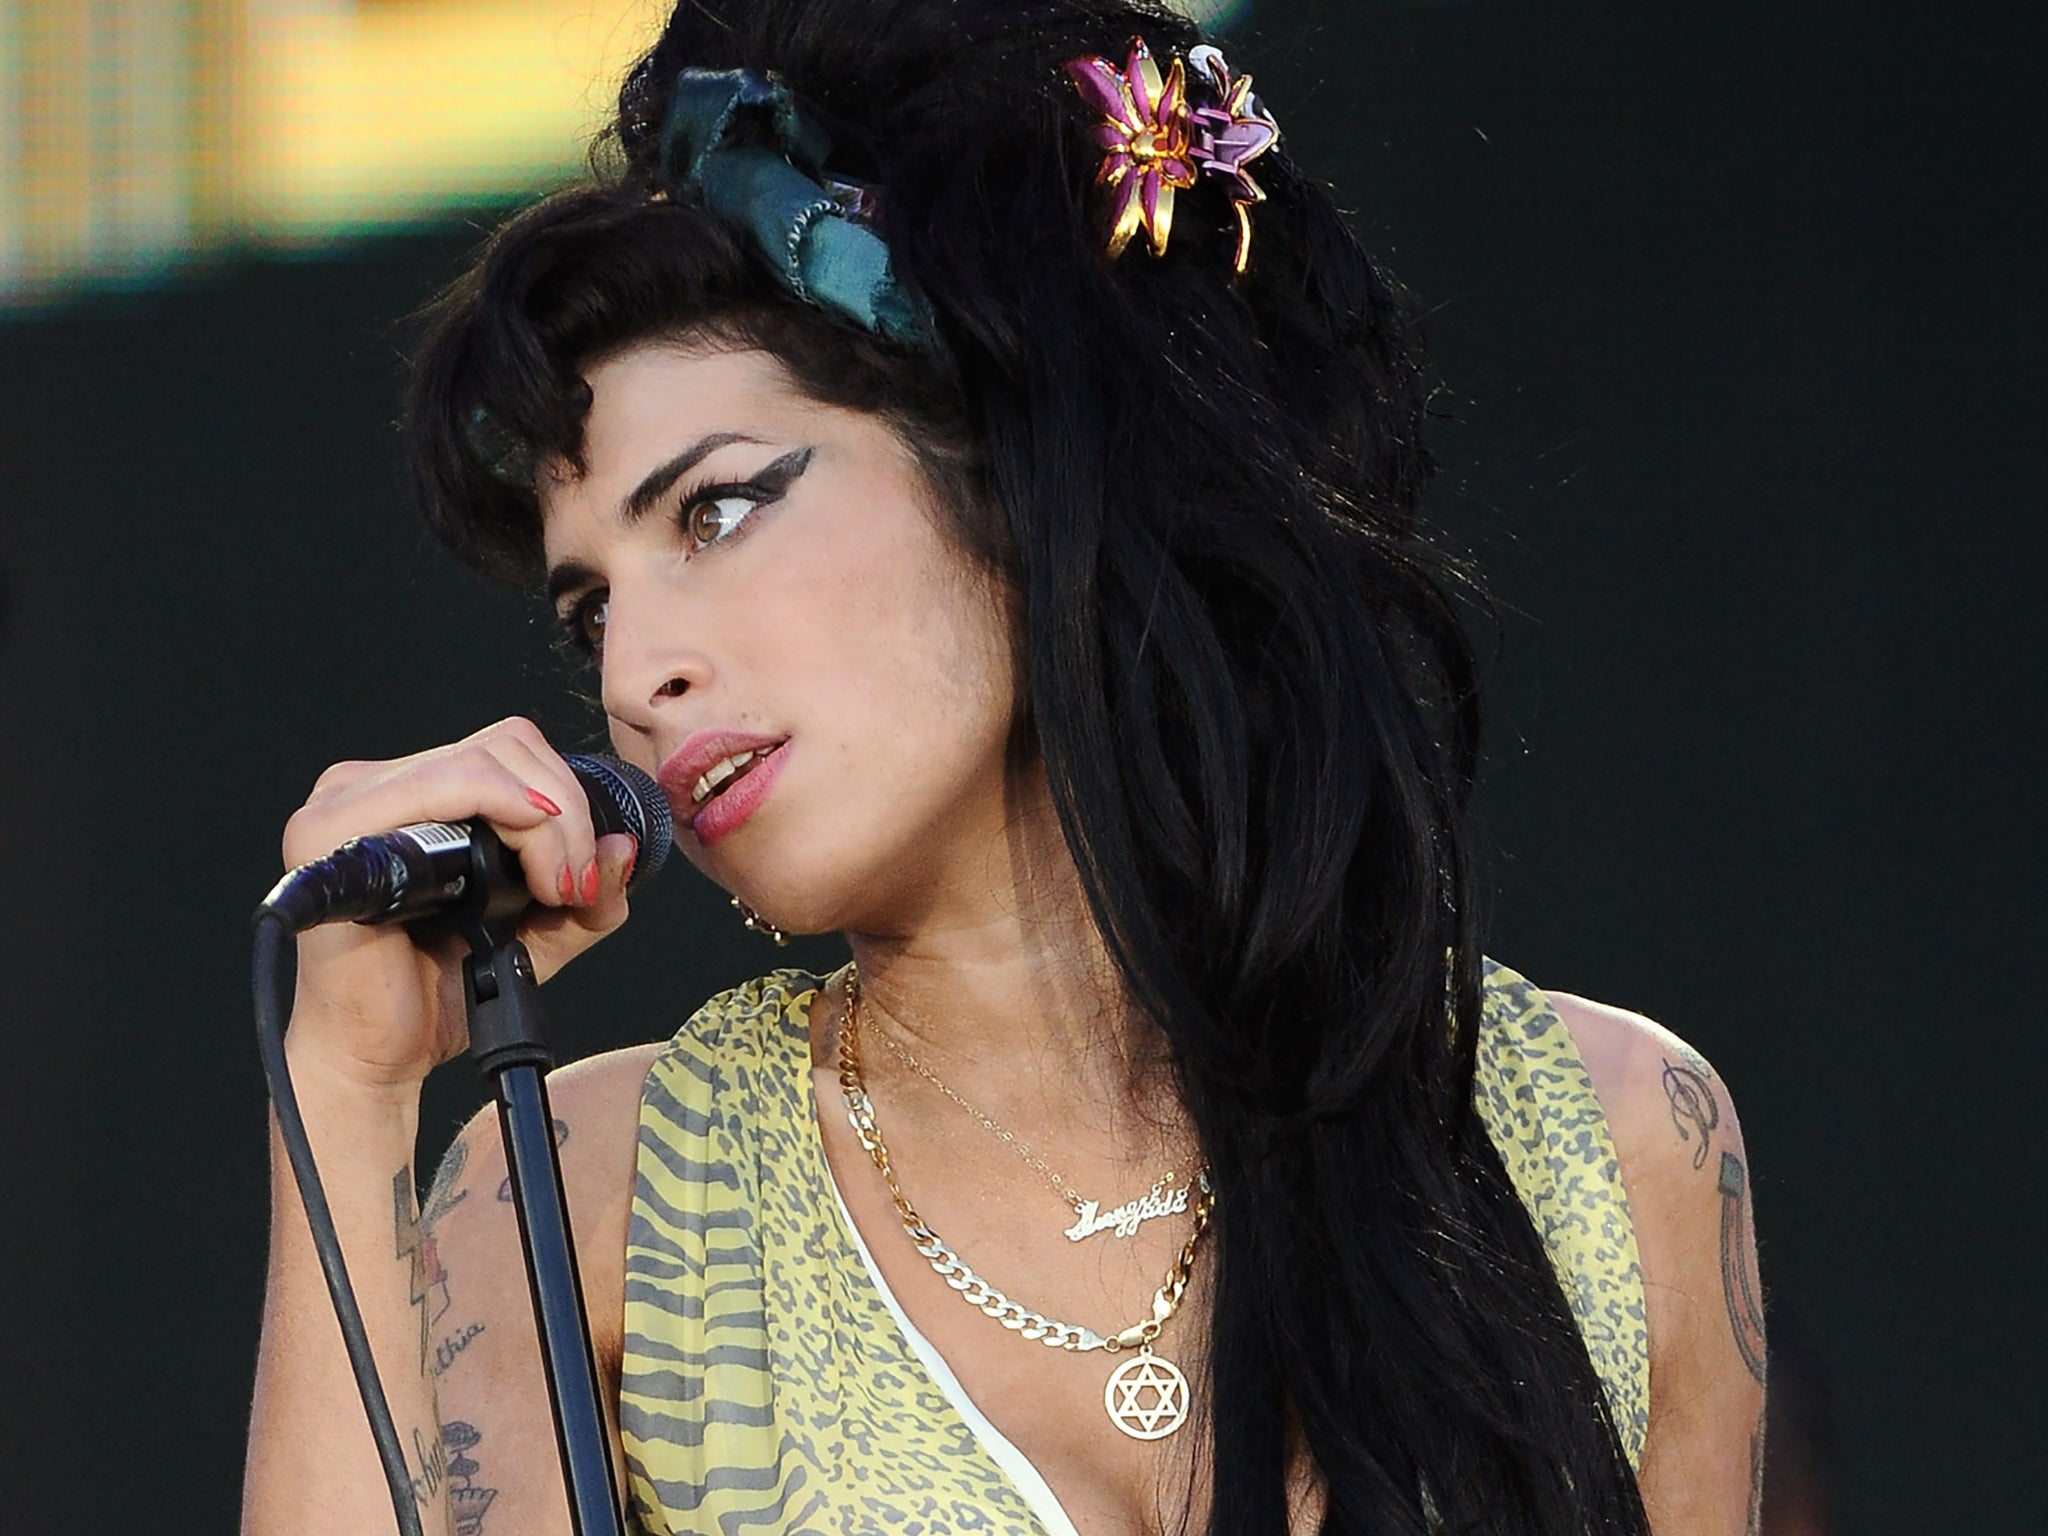 Is guilt or greed fuelling the new Amy Winehouse biopic? | The Independent